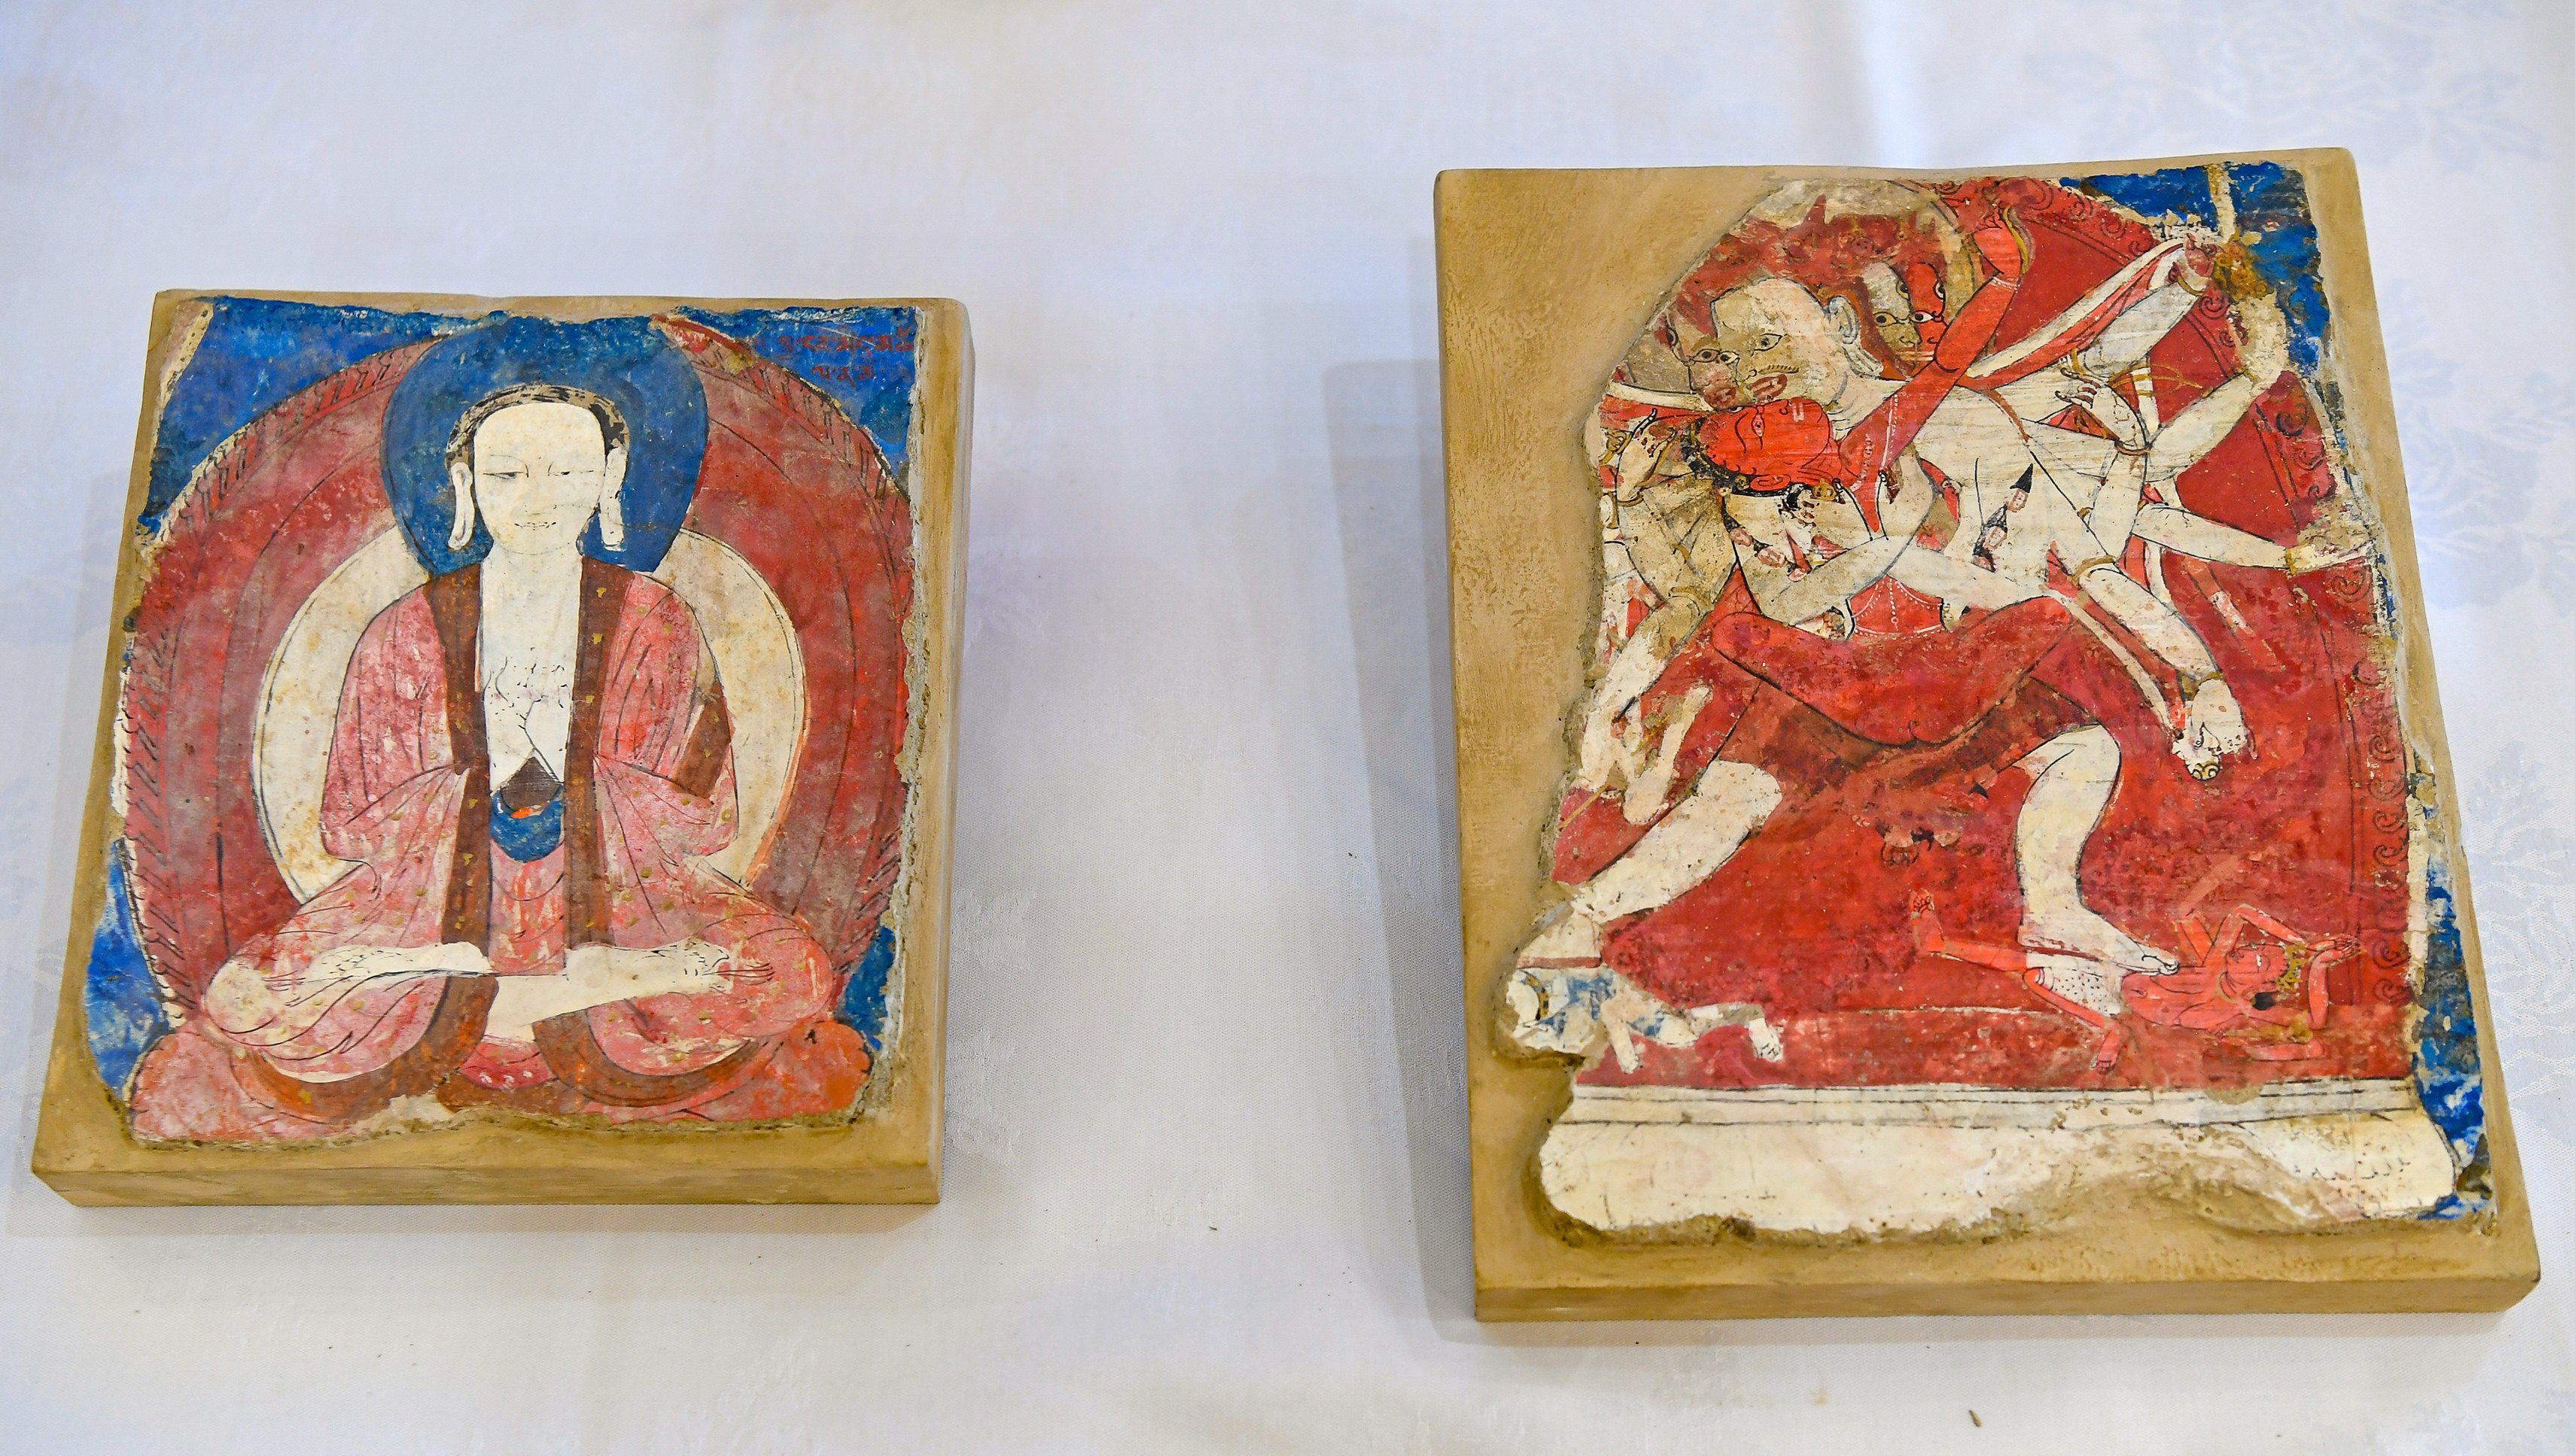 A group of 38 Chinese artefacts, including these highly decorative mural fragments, have been returned to China by the US under a repatriation agreement. Photo: Xinhua